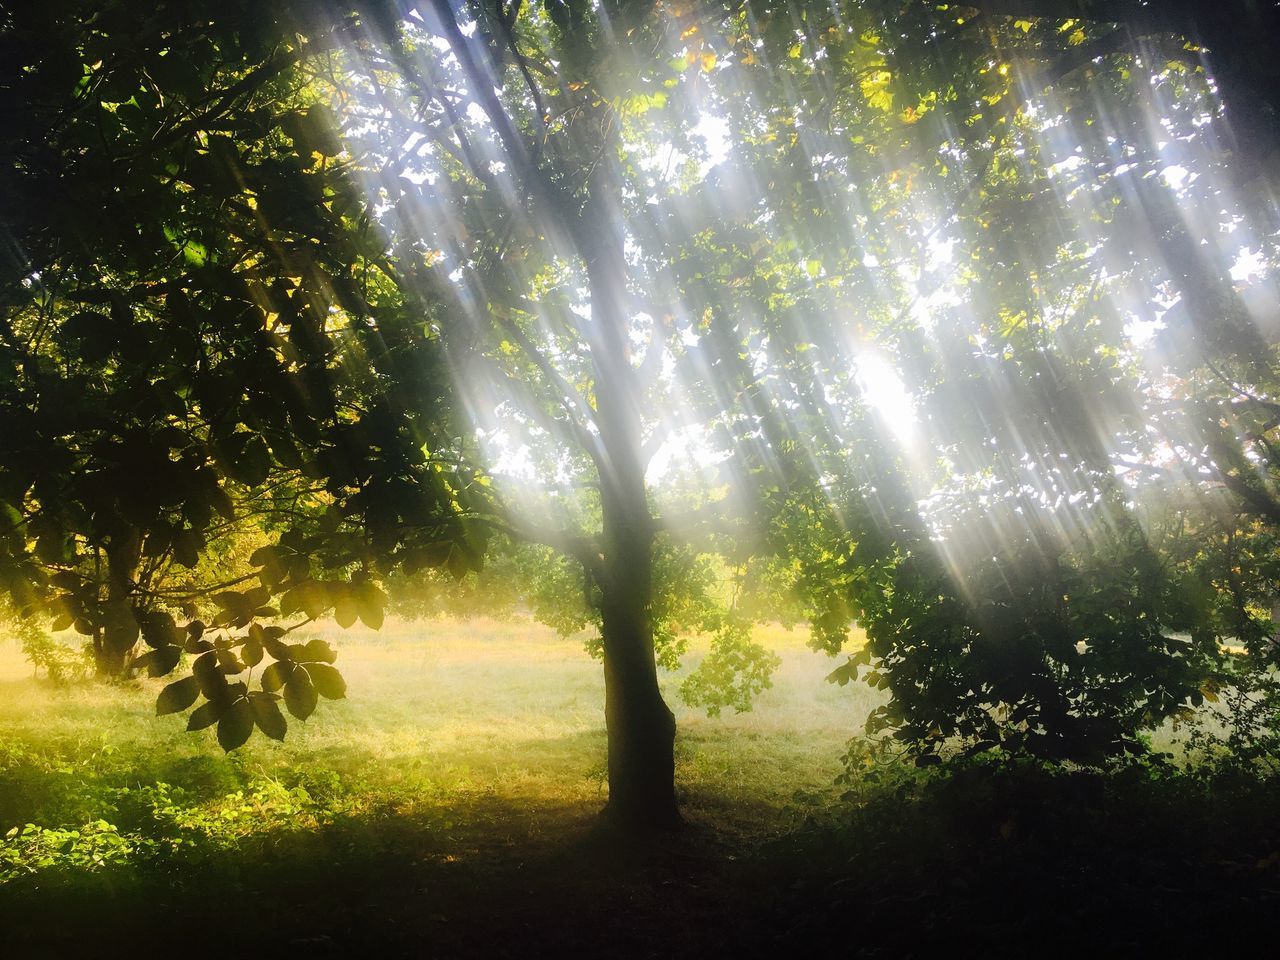 sunlight, light, tree, plant, sunbeam, nature, environment, beauty in nature, land, forest, morning, leaf, tranquility, green, sun, landscape, scenics - nature, no people, sky, back lit, shadow, outdoors, fog, growth, tranquil scene, reflection, summer, non-urban scene, light - natural phenomenon, woodland, yellow, darkness, idyllic, grass, lens flare, mist, field